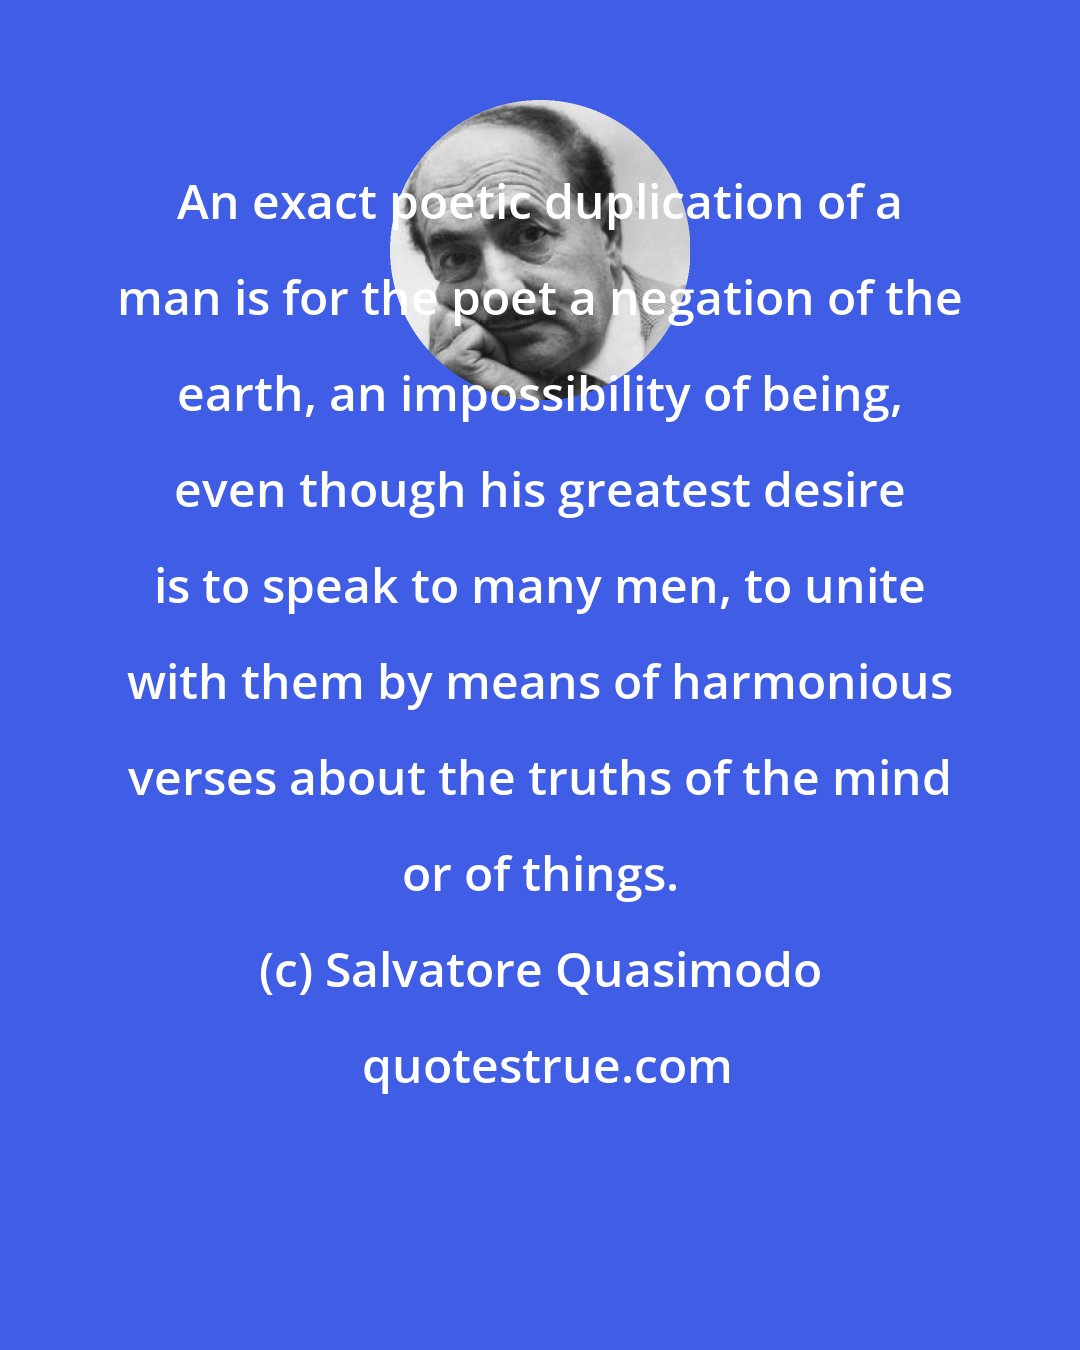 Salvatore Quasimodo: An exact poetic duplication of a man is for the poet a negation of the earth, an impossibility of being, even though his greatest desire is to speak to many men, to unite with them by means of harmonious verses about the truths of the mind or of things.